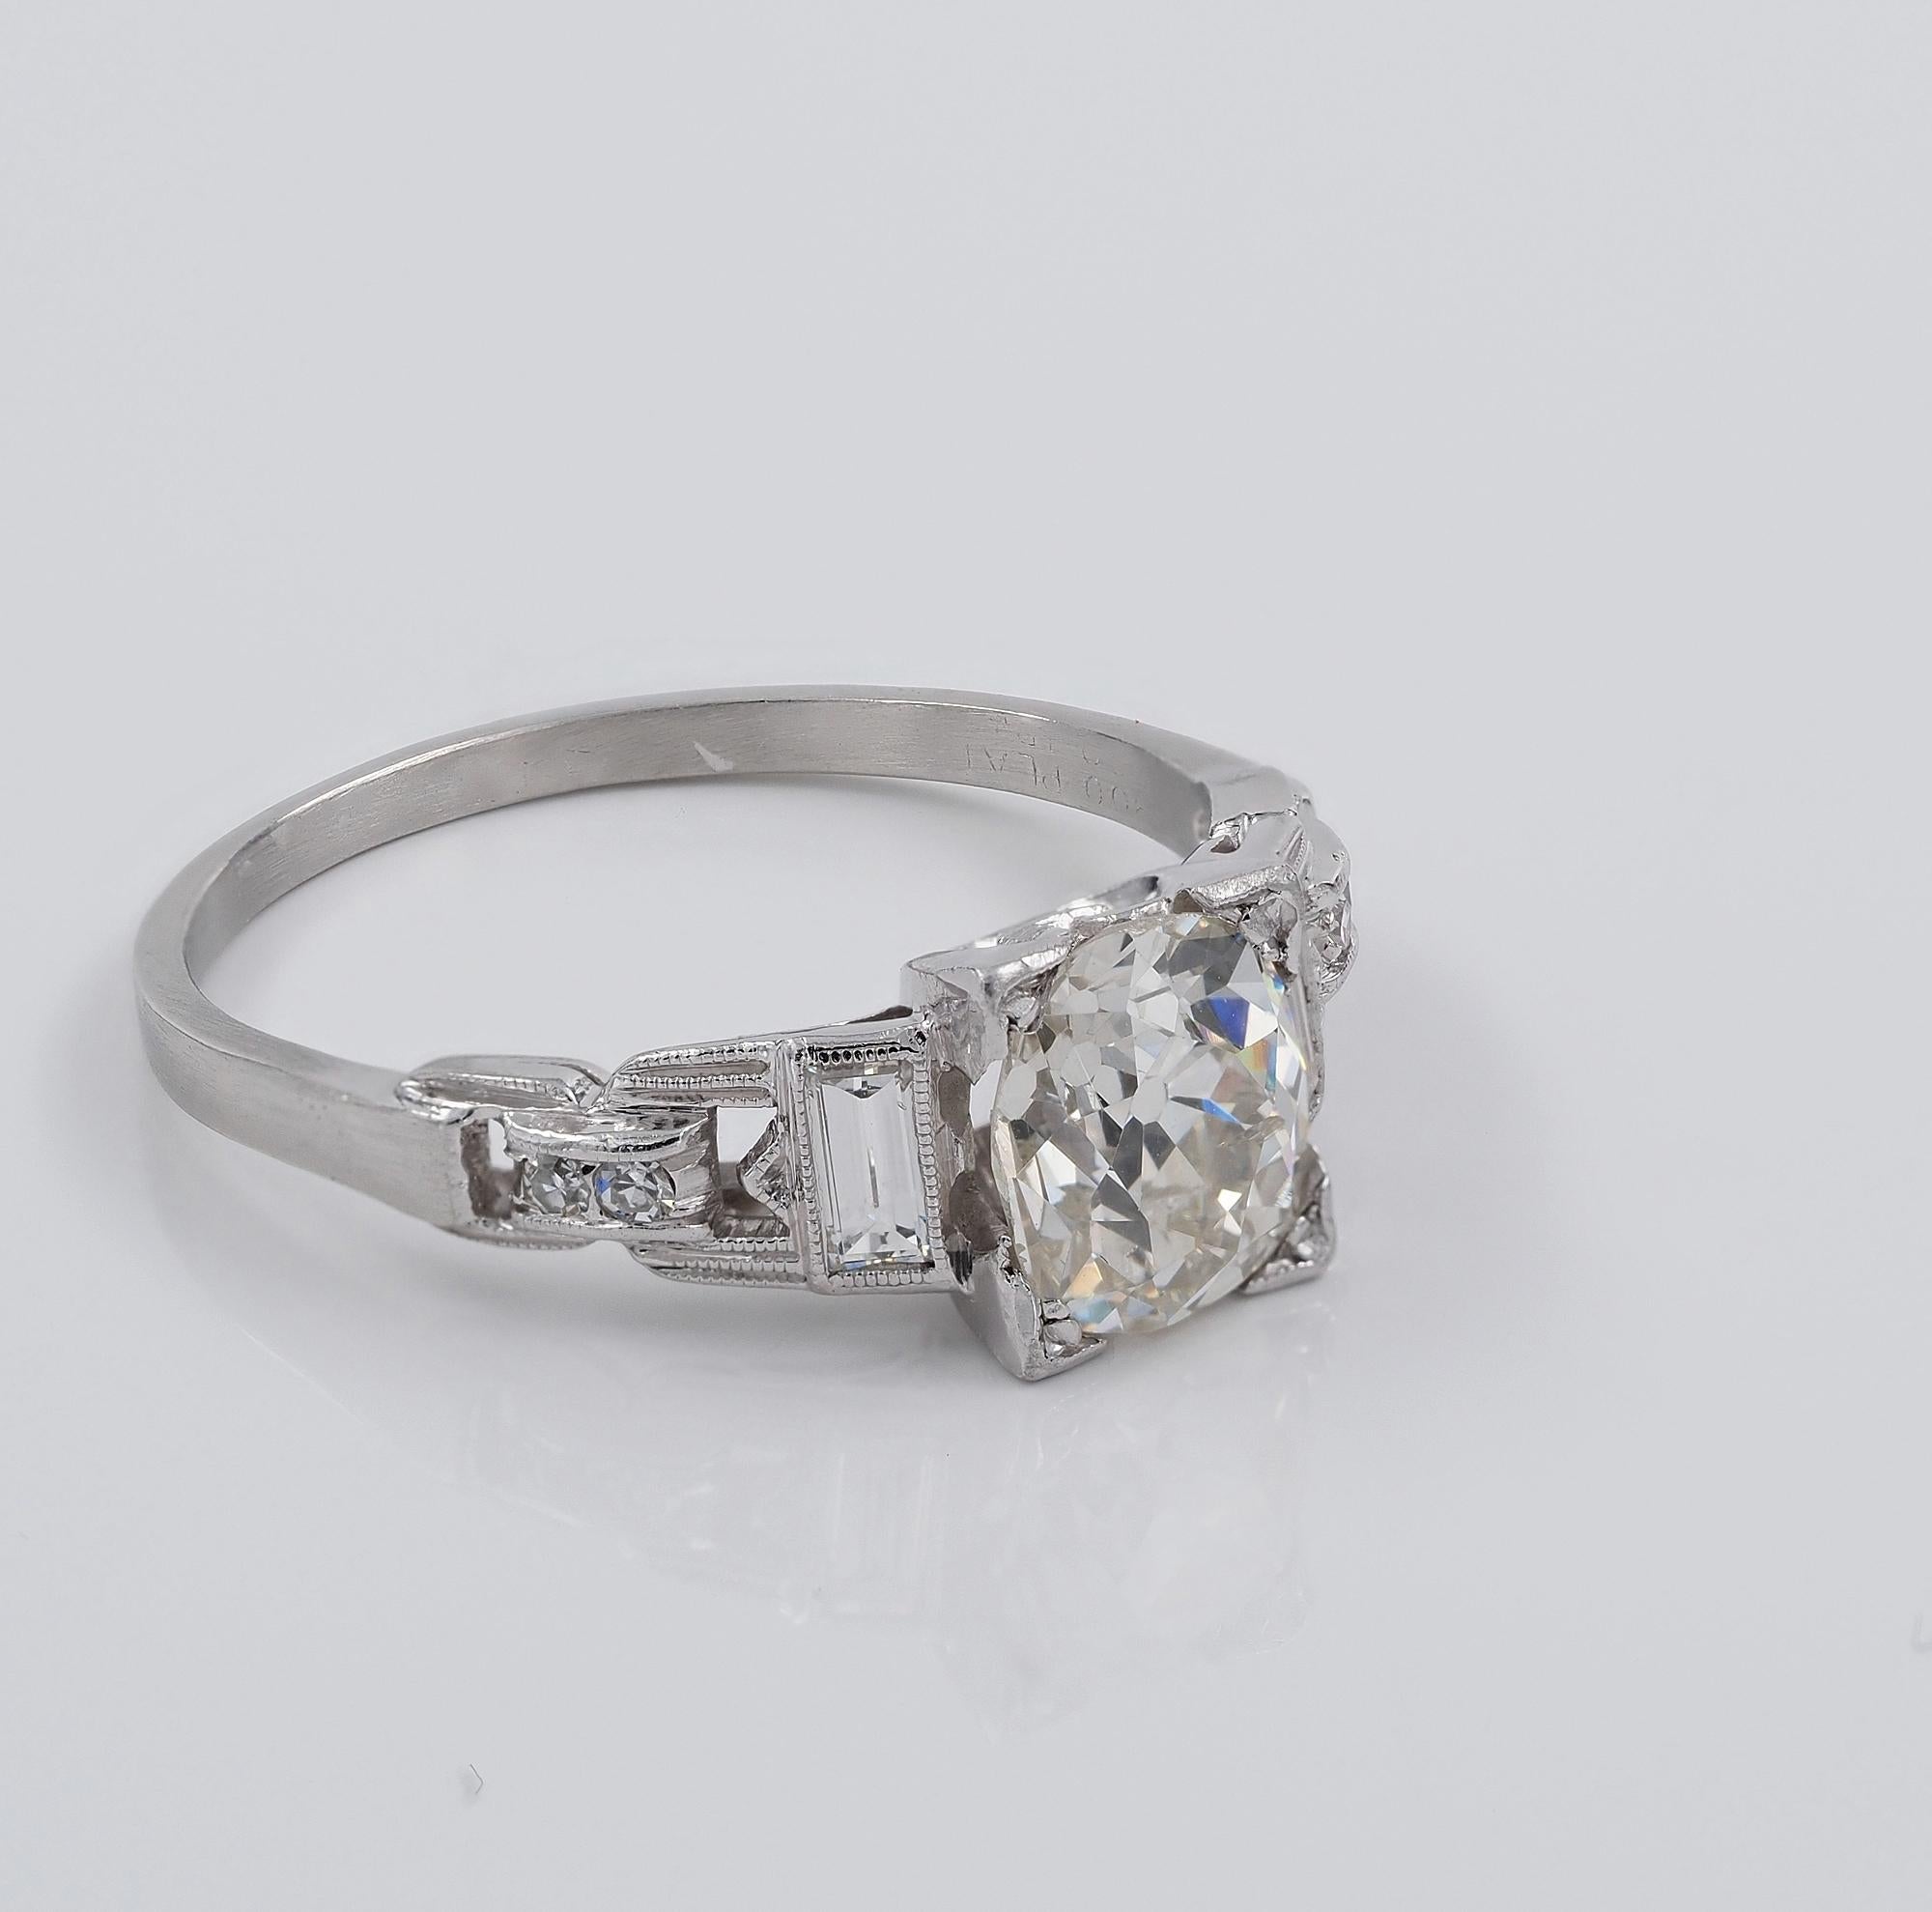 Roaring 20’s
This beautiful Art deco Diamond solitaire ring has been hand crafted of solid Platinum during 1920 ca, tested
Appealing mounting displaying unique design from the period with gorgeous openwork and buckle design connecting the crown to